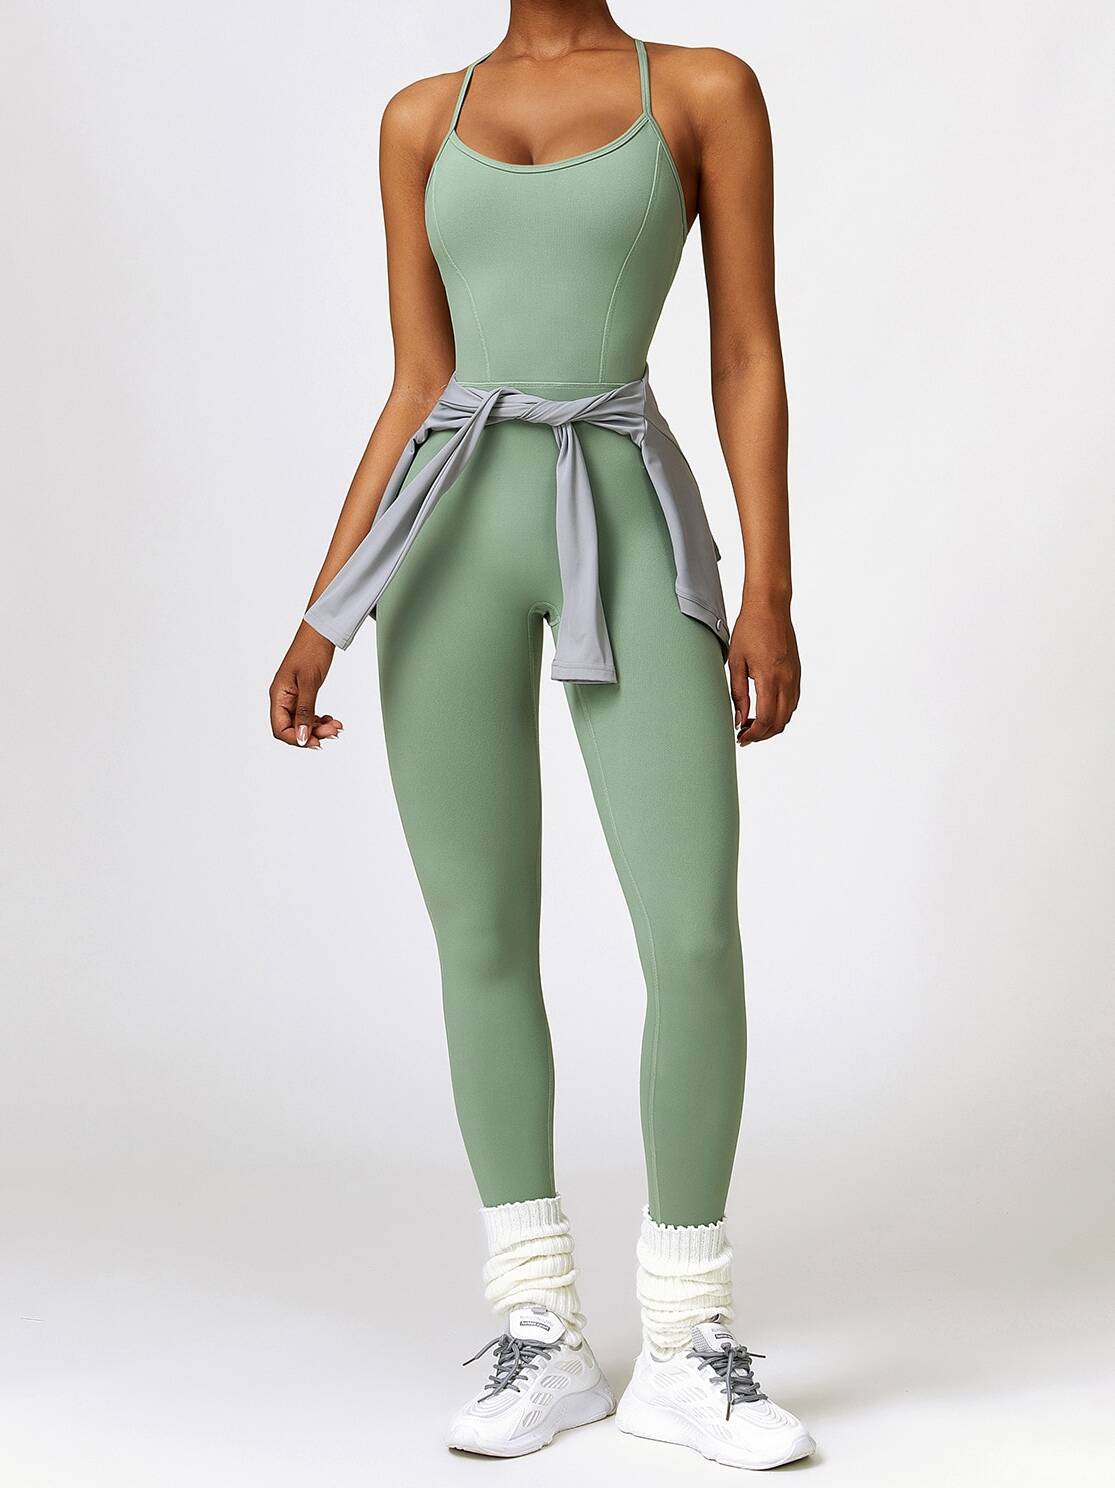 Women Athleisure Fitness Bodysuit Backless One Piece Yoga Jumpsuit